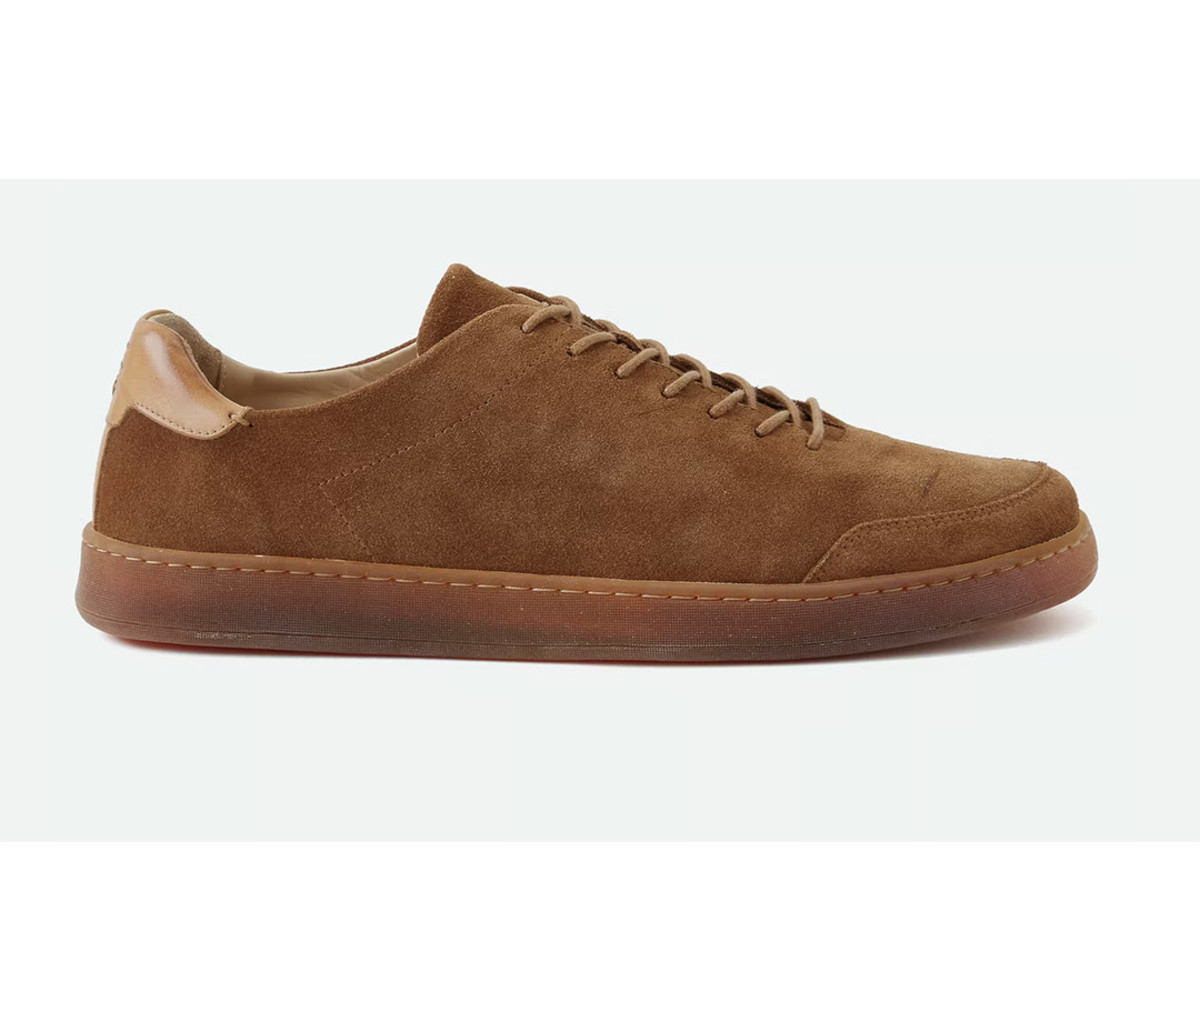 These LUCA Terra Low Sneakers Are Some of The Comfiest Shoes Around ...